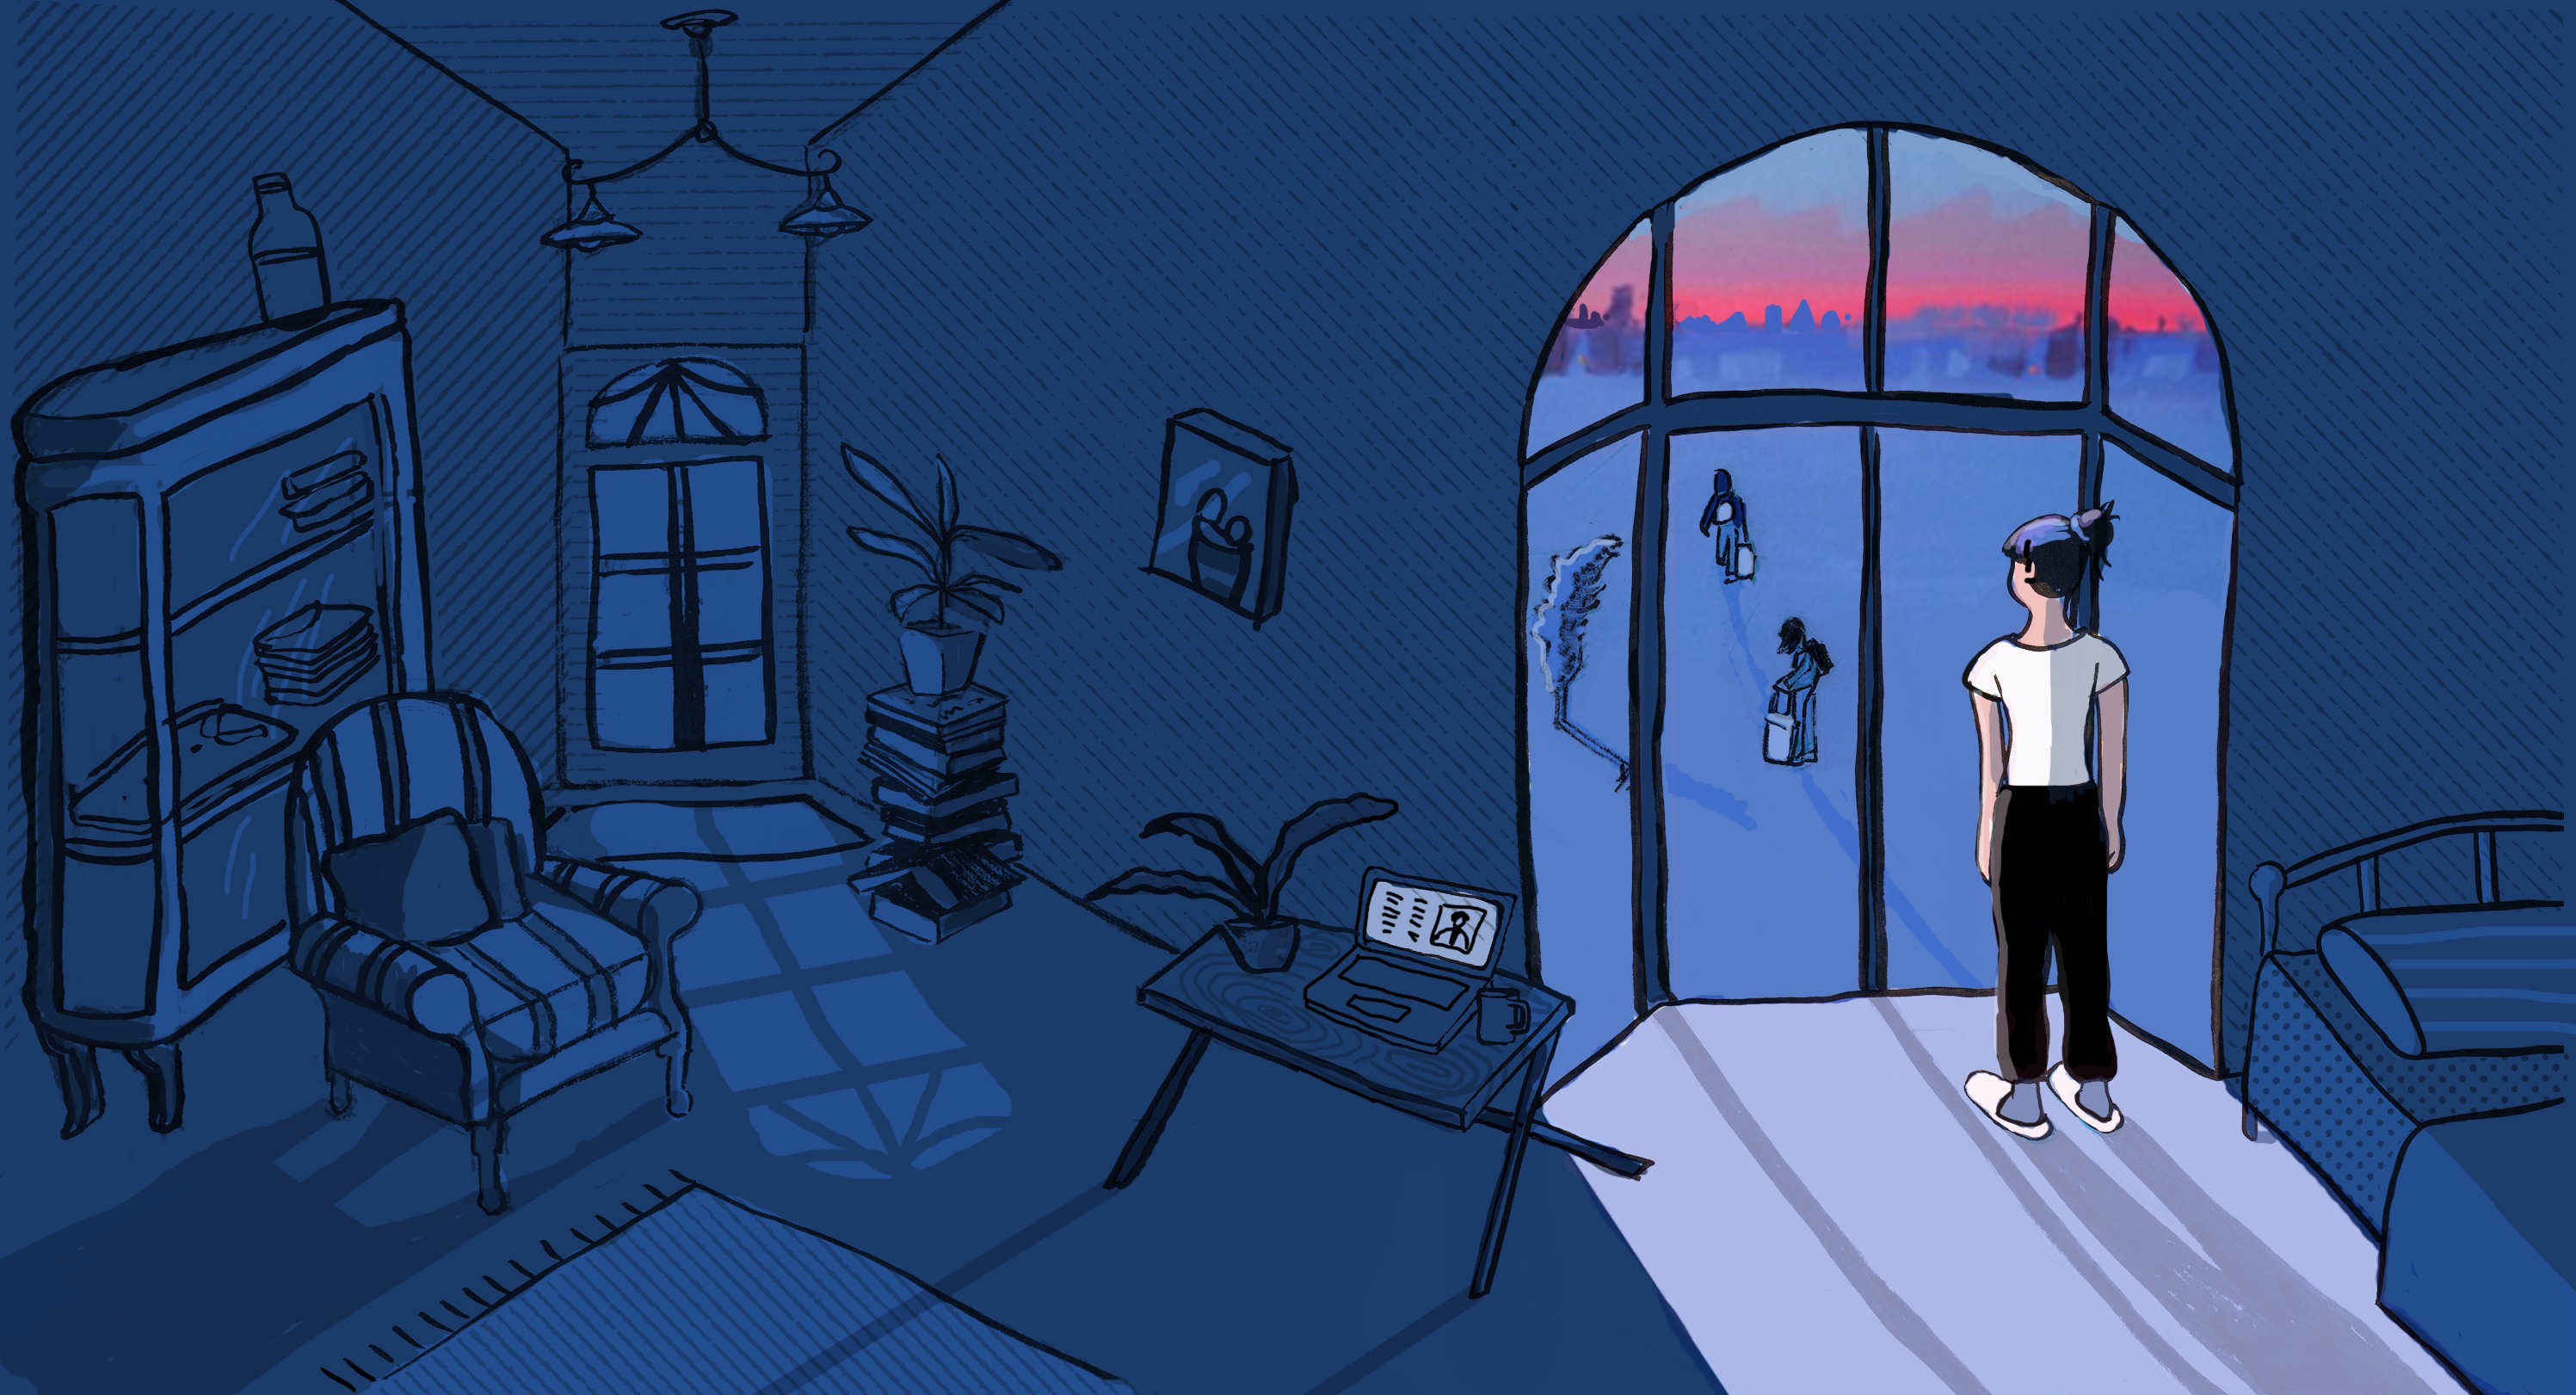 Cartoon-style image of a lonely person standing in a darkened room looking out of the window at people outside